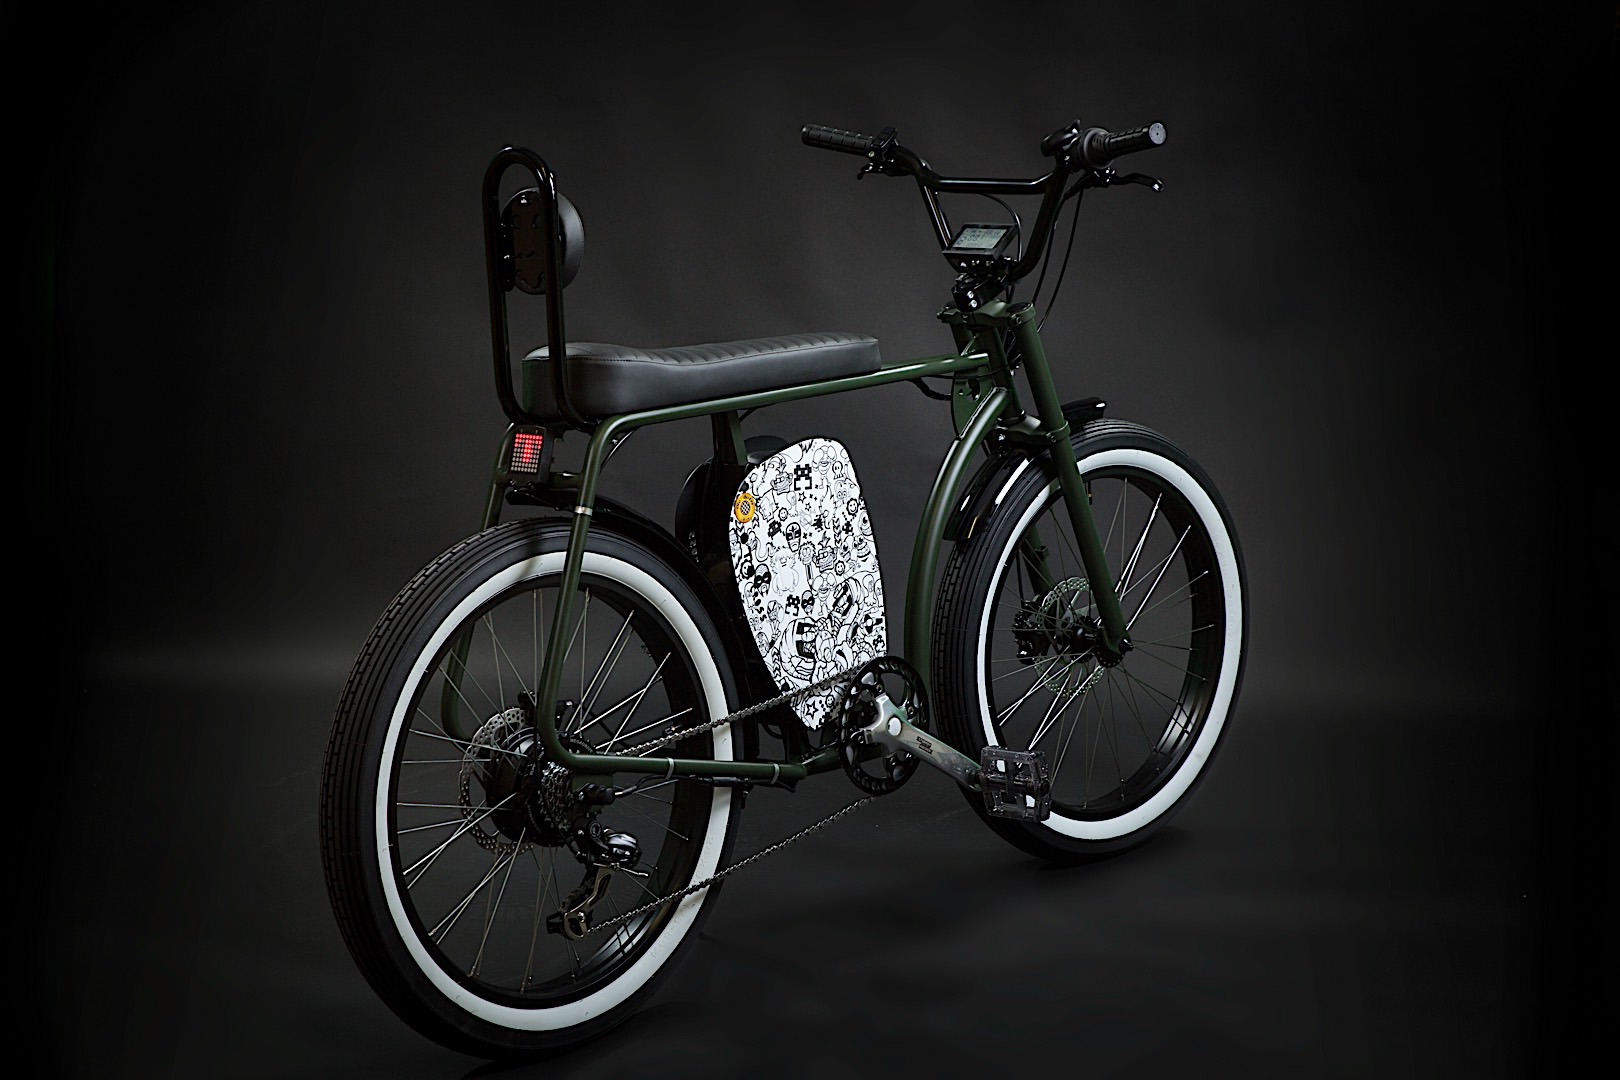 Otocycles' New CrosS Retro e-Bike Makes You Look Cool (If